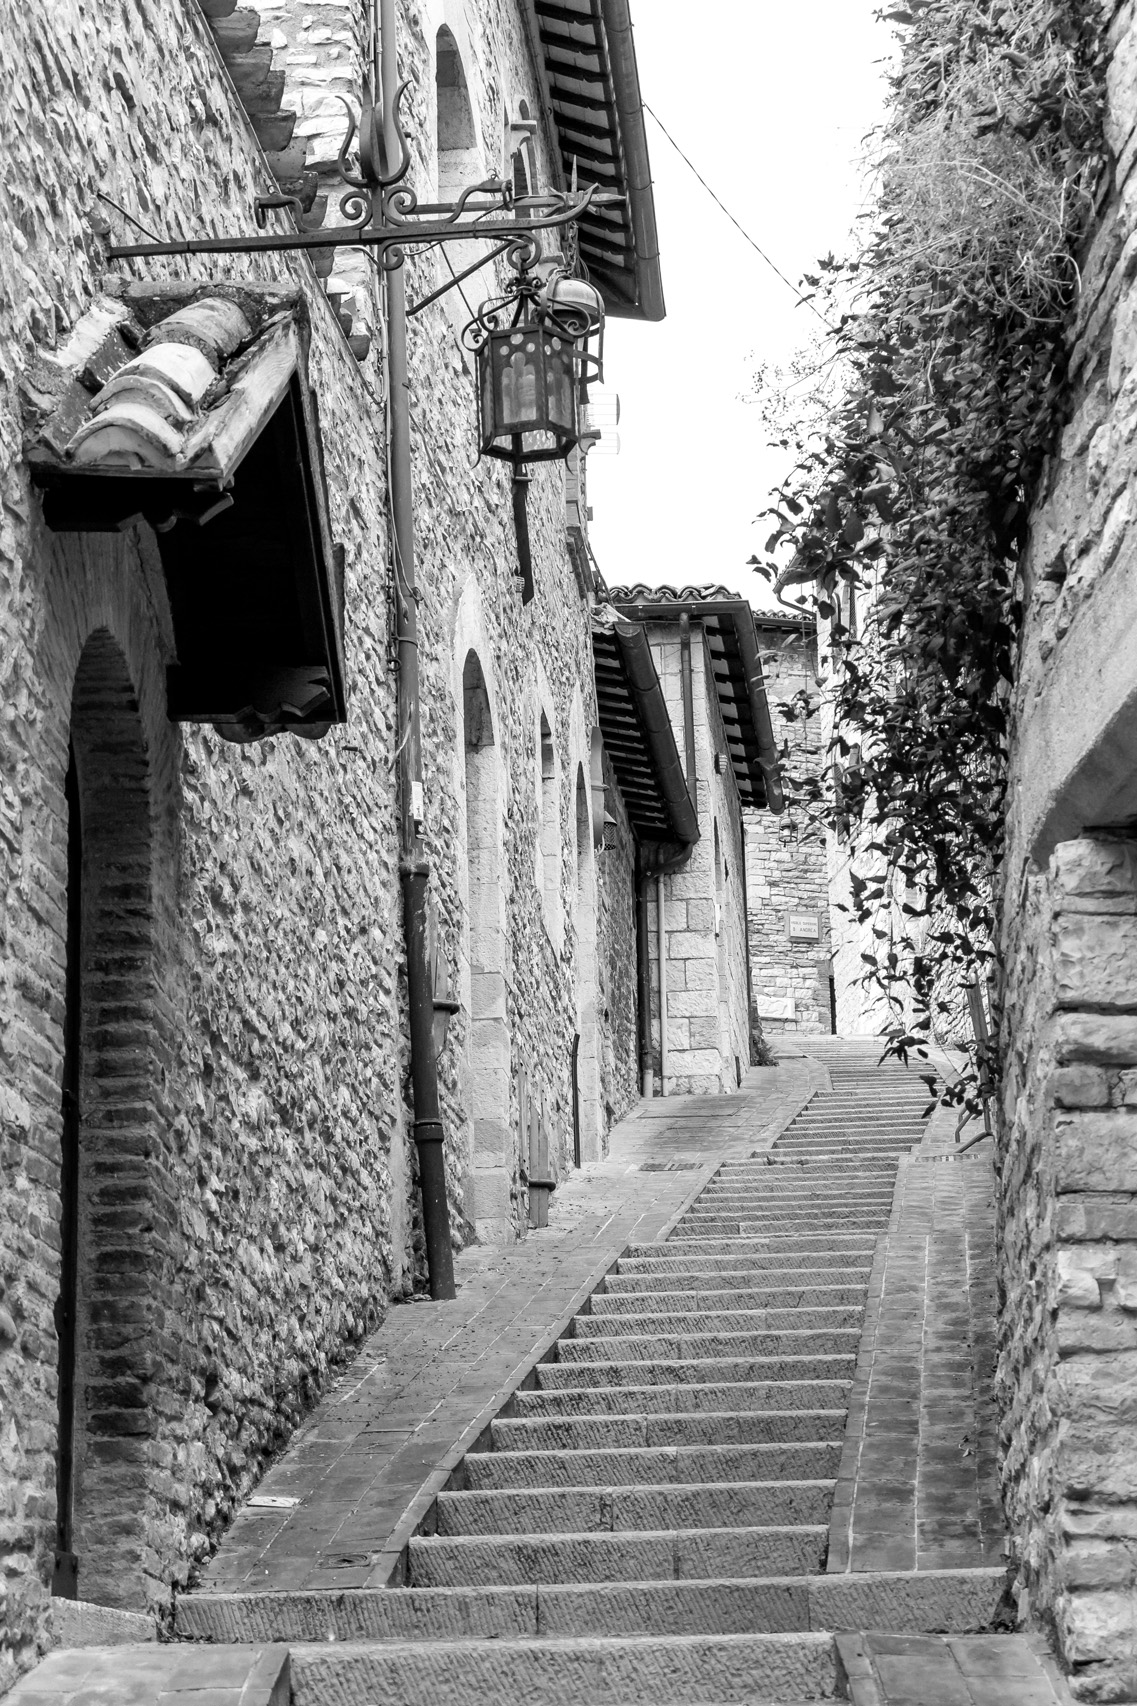 The streets of Assisi, Italy